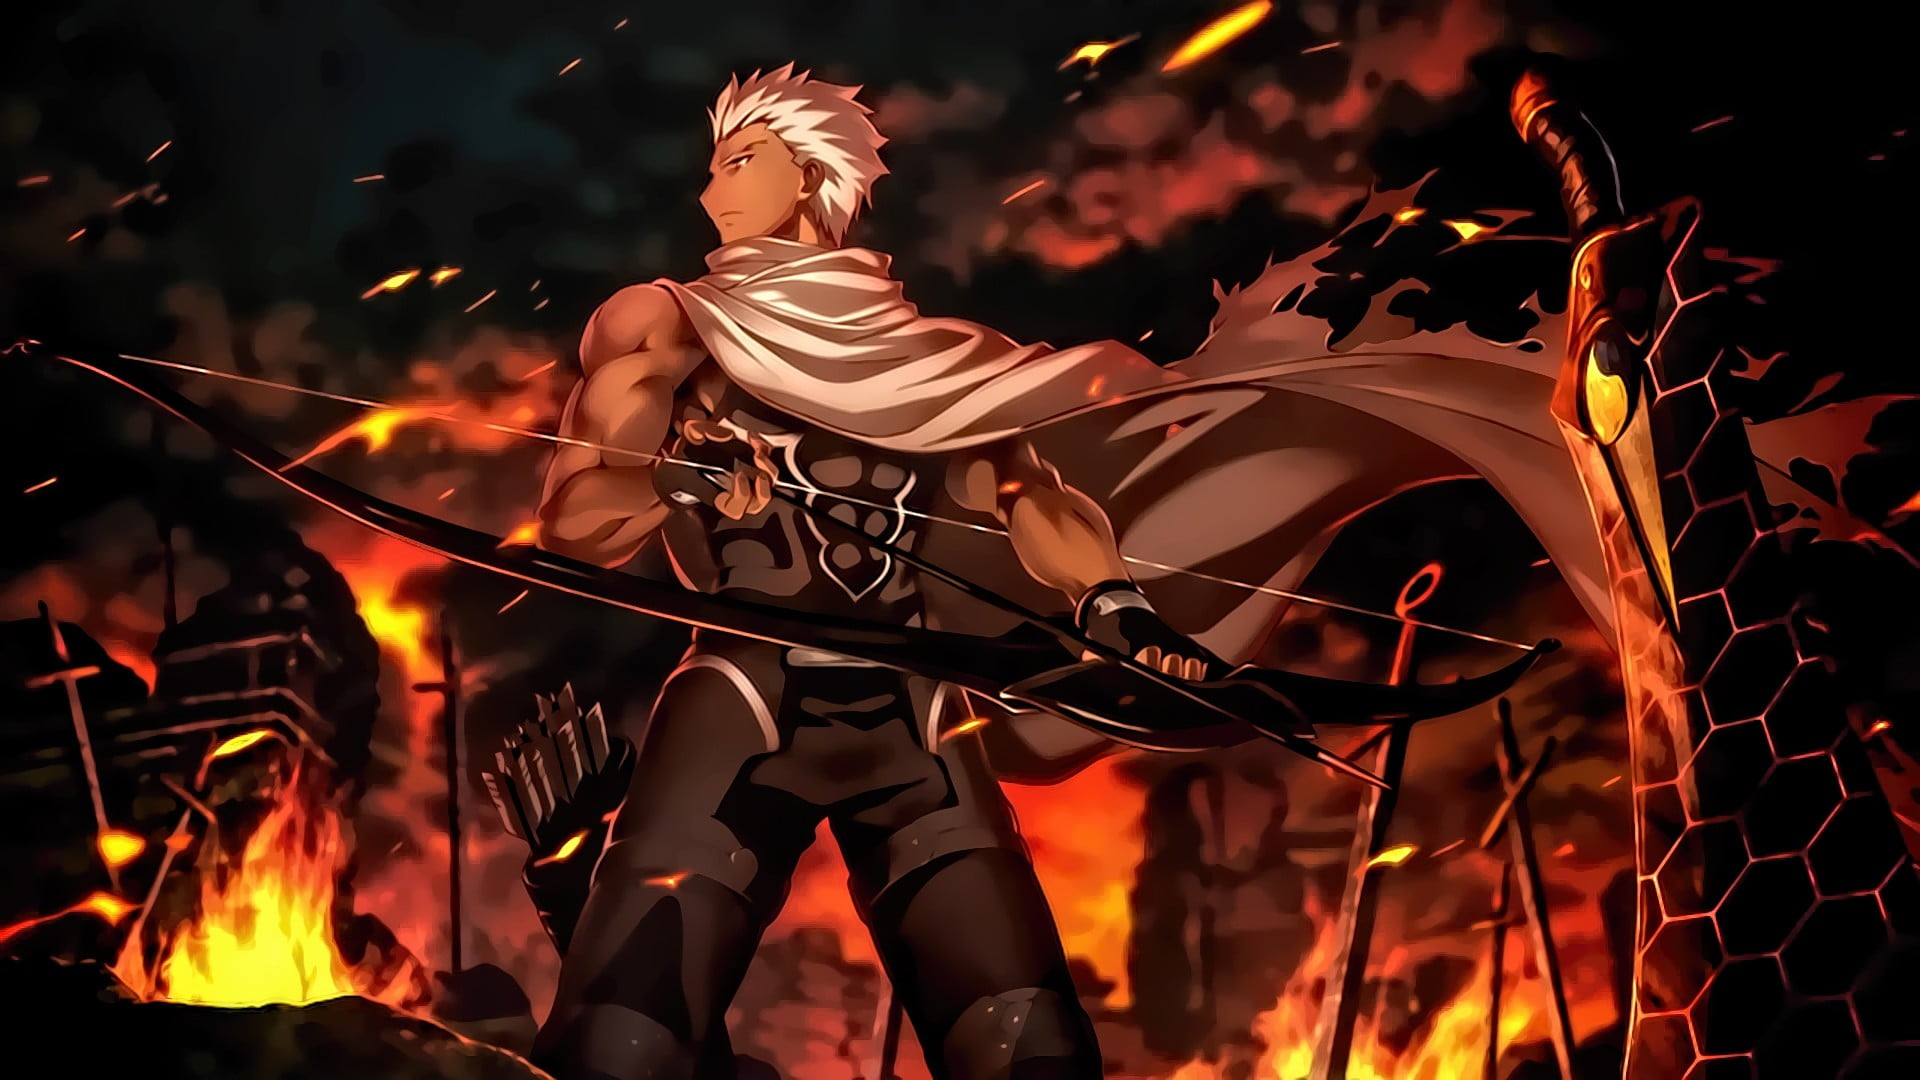 Fate/stay night: Unlimited Blade Works - wide 6